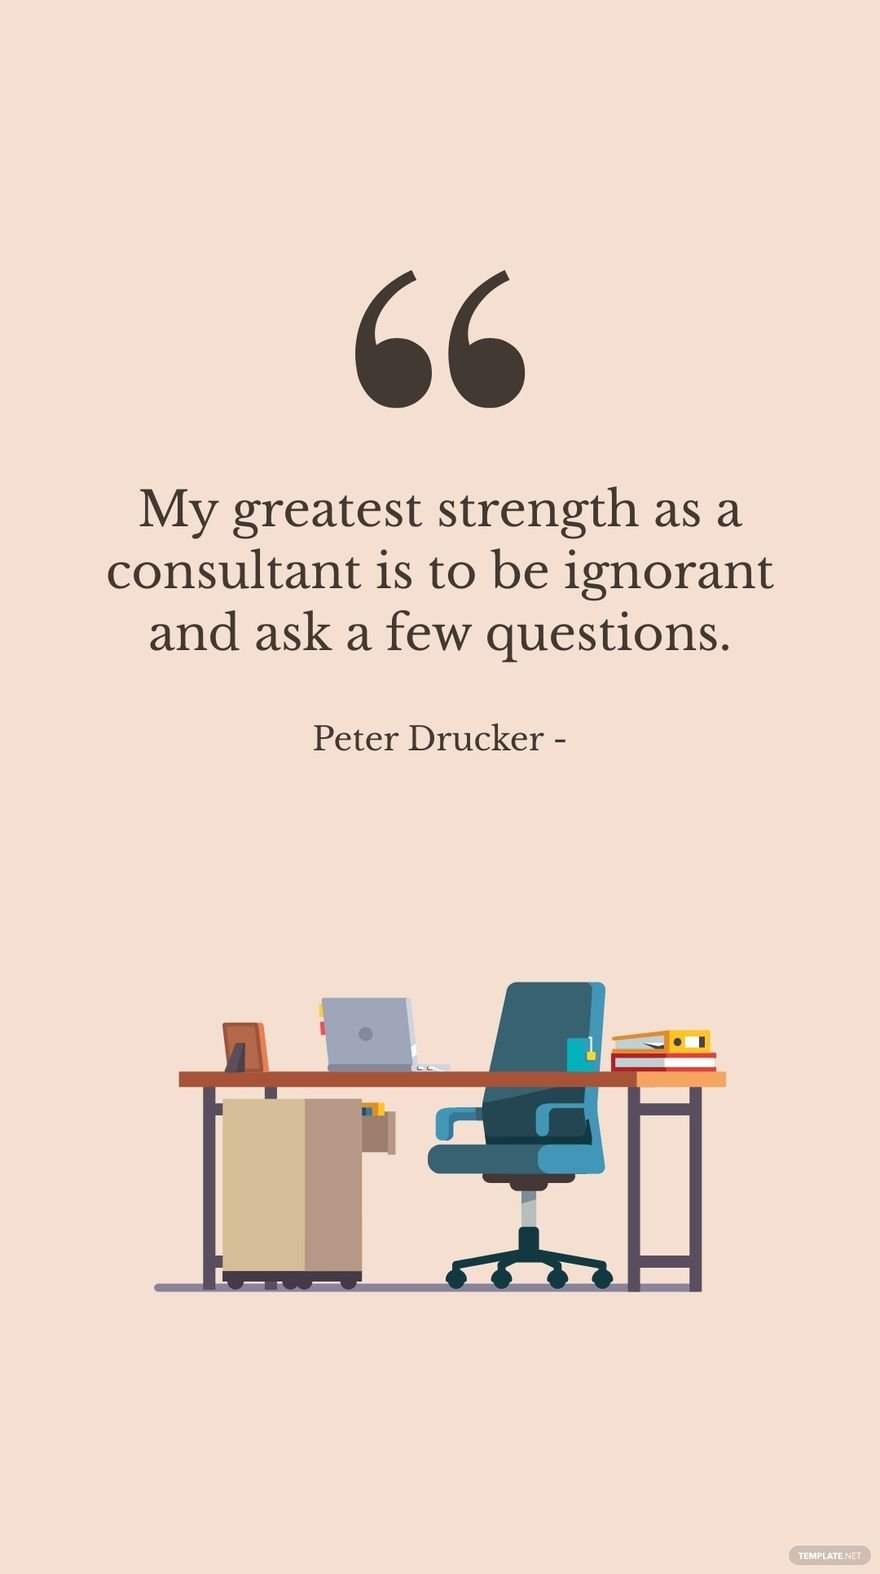 Peter Drucker - My greatest strength as a consultant is to be ignorant and ask a few questions. in JPG